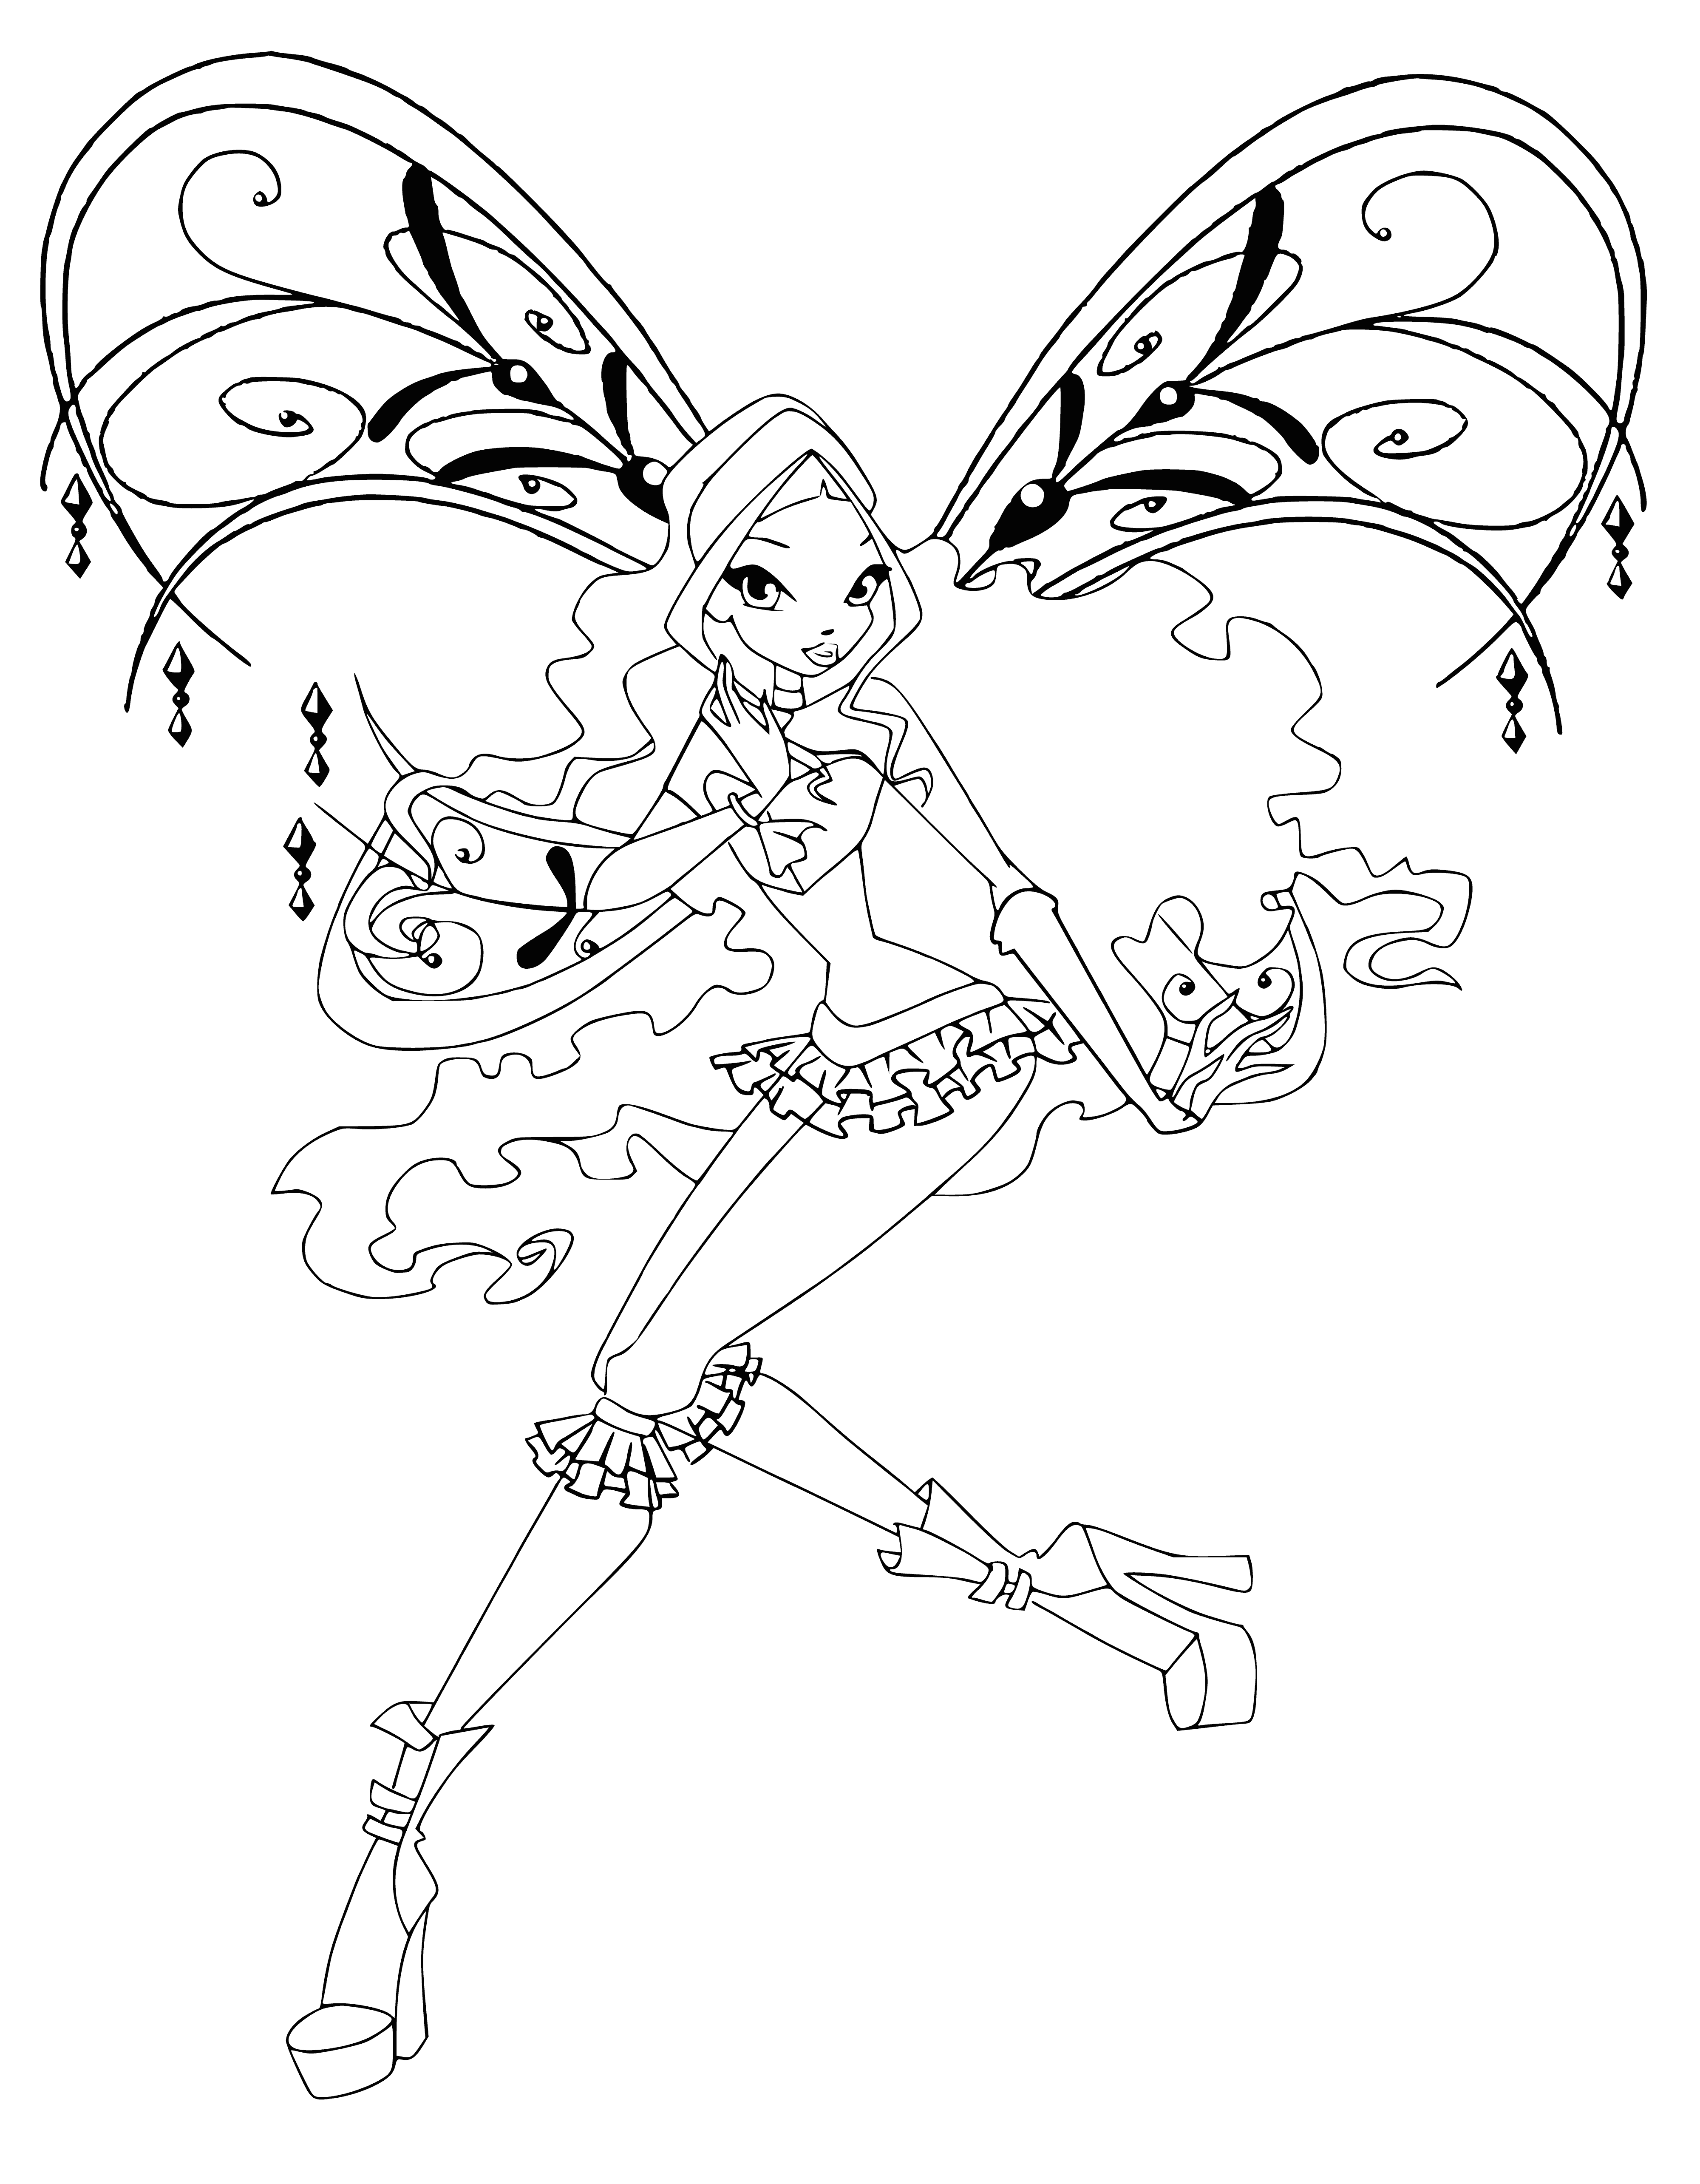 coloring page: Pink-haired fairy in light blue dress sits on rock in meadow, pointing right; butterfly on shoulder; blue eye shadow & earrings.